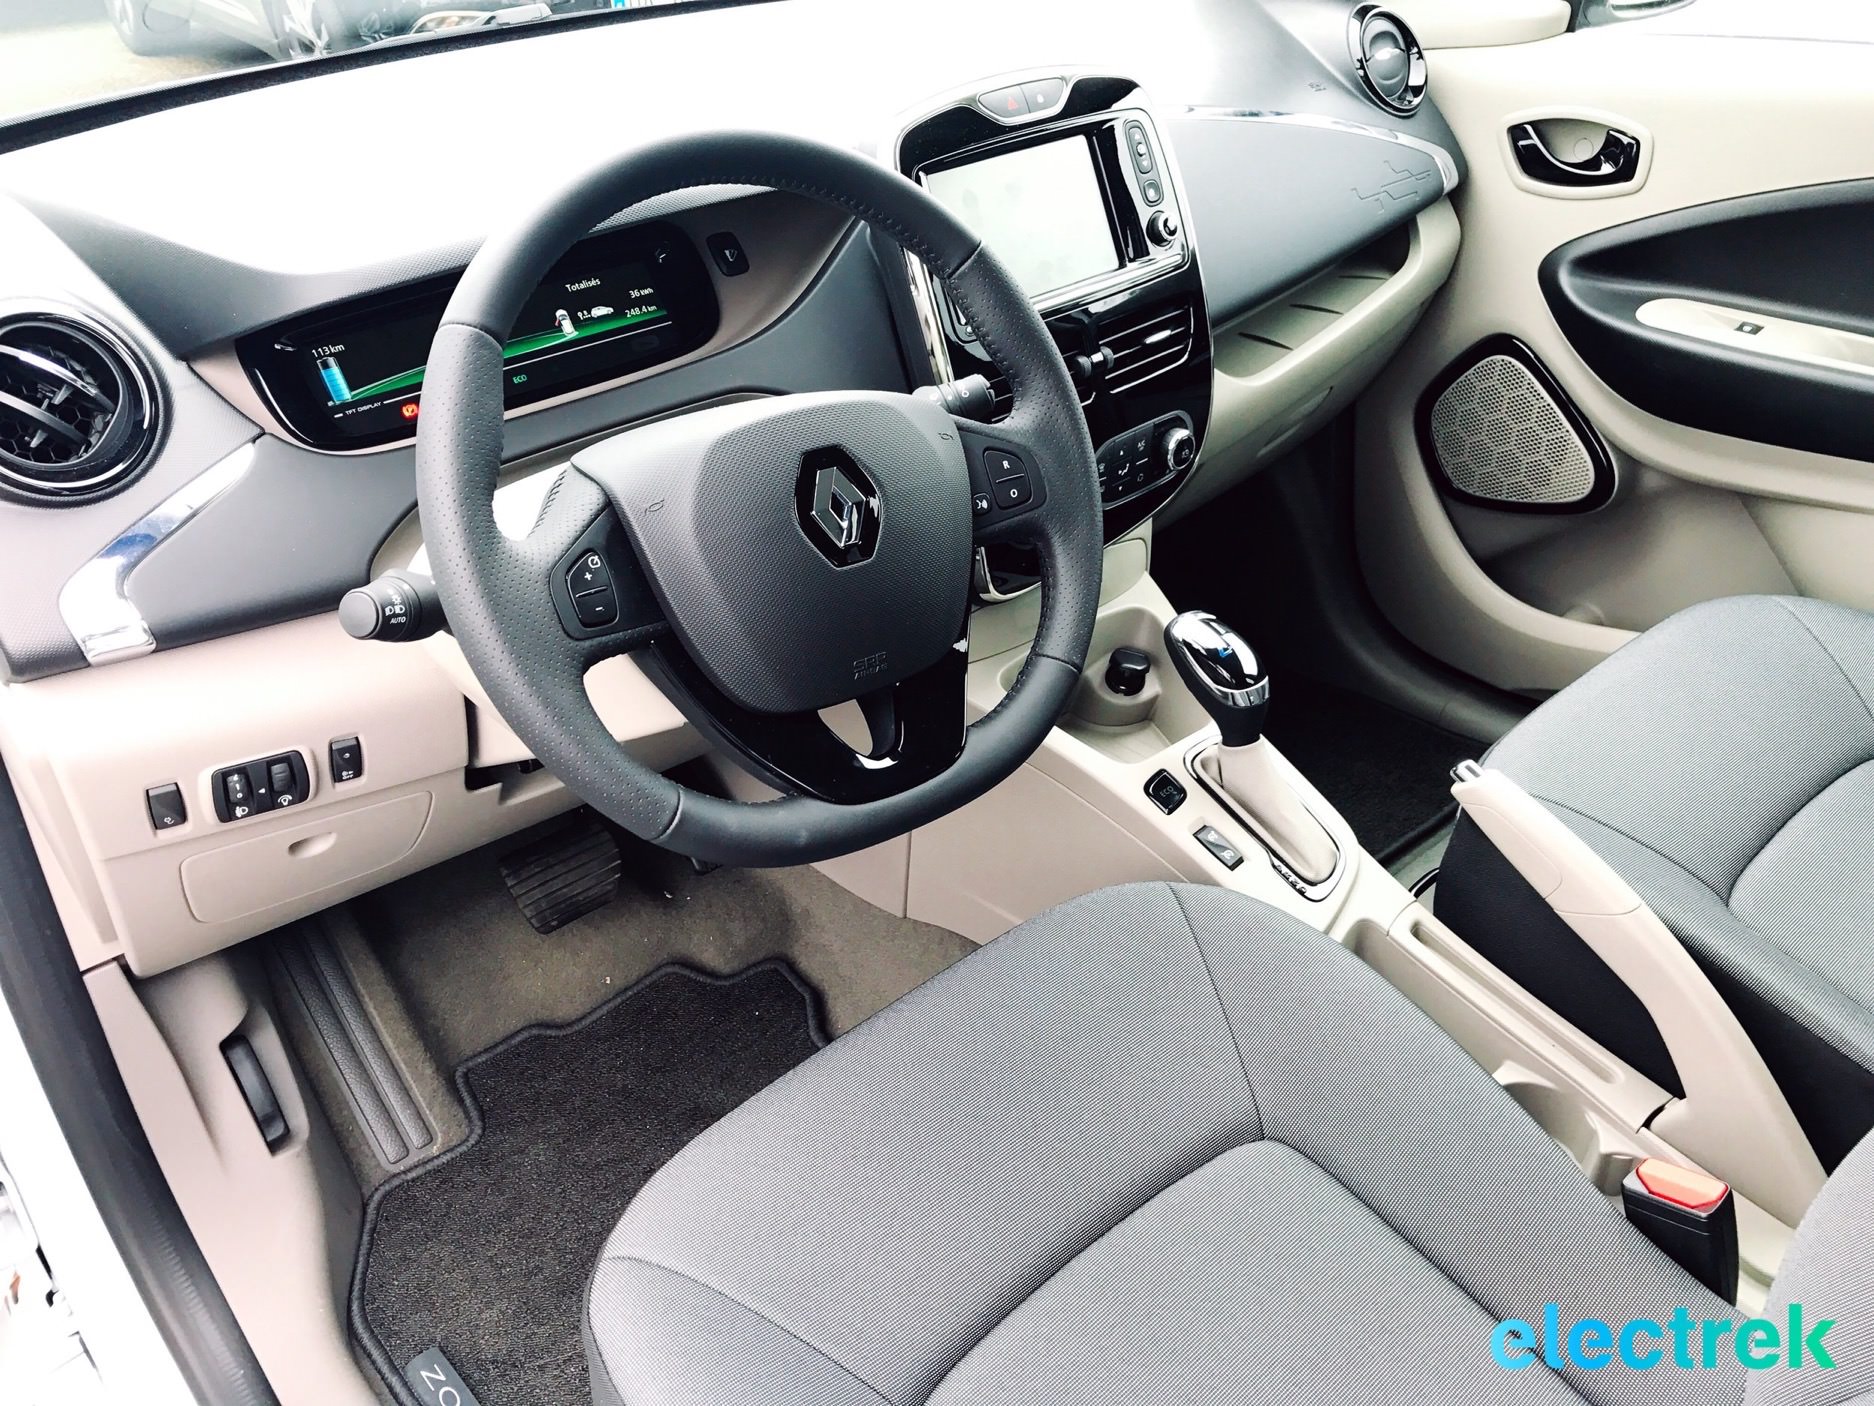 New Renault Zoe Electric Car New Modern Technology Interior Design Details  Bucharest Romania 2021 Stock Photo  Download Image Now  iStock